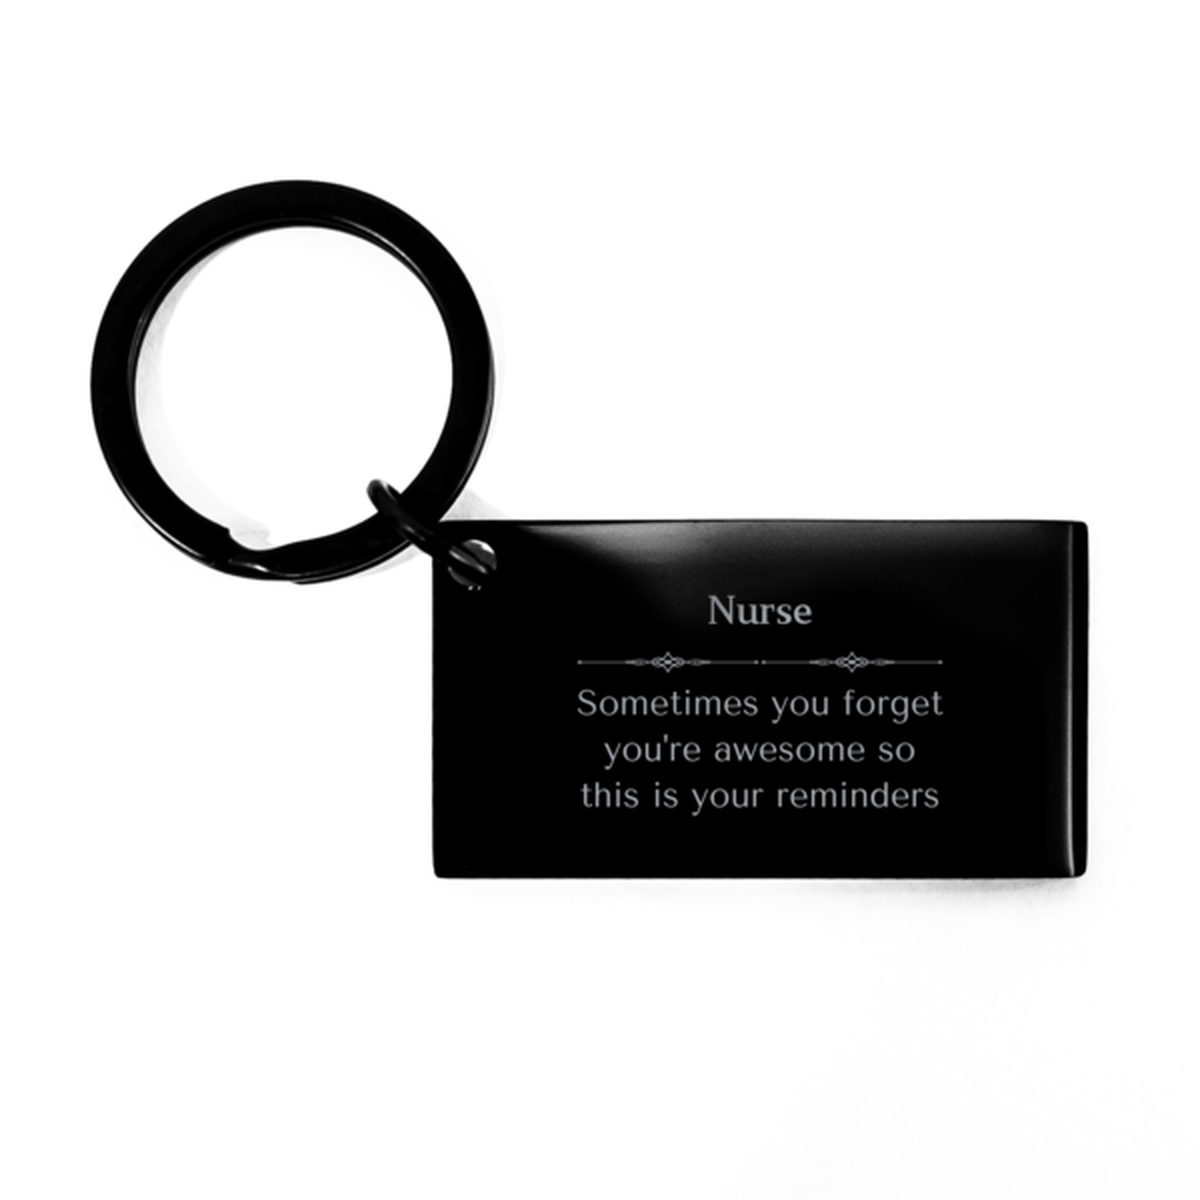 Sentimental Nurse Keychain, Personal Care Aide Sometimes you forget you're awesome so this is your reminders, Graduation Christmas Birthday Gifts for Nurse, Men, Women, Coworkers